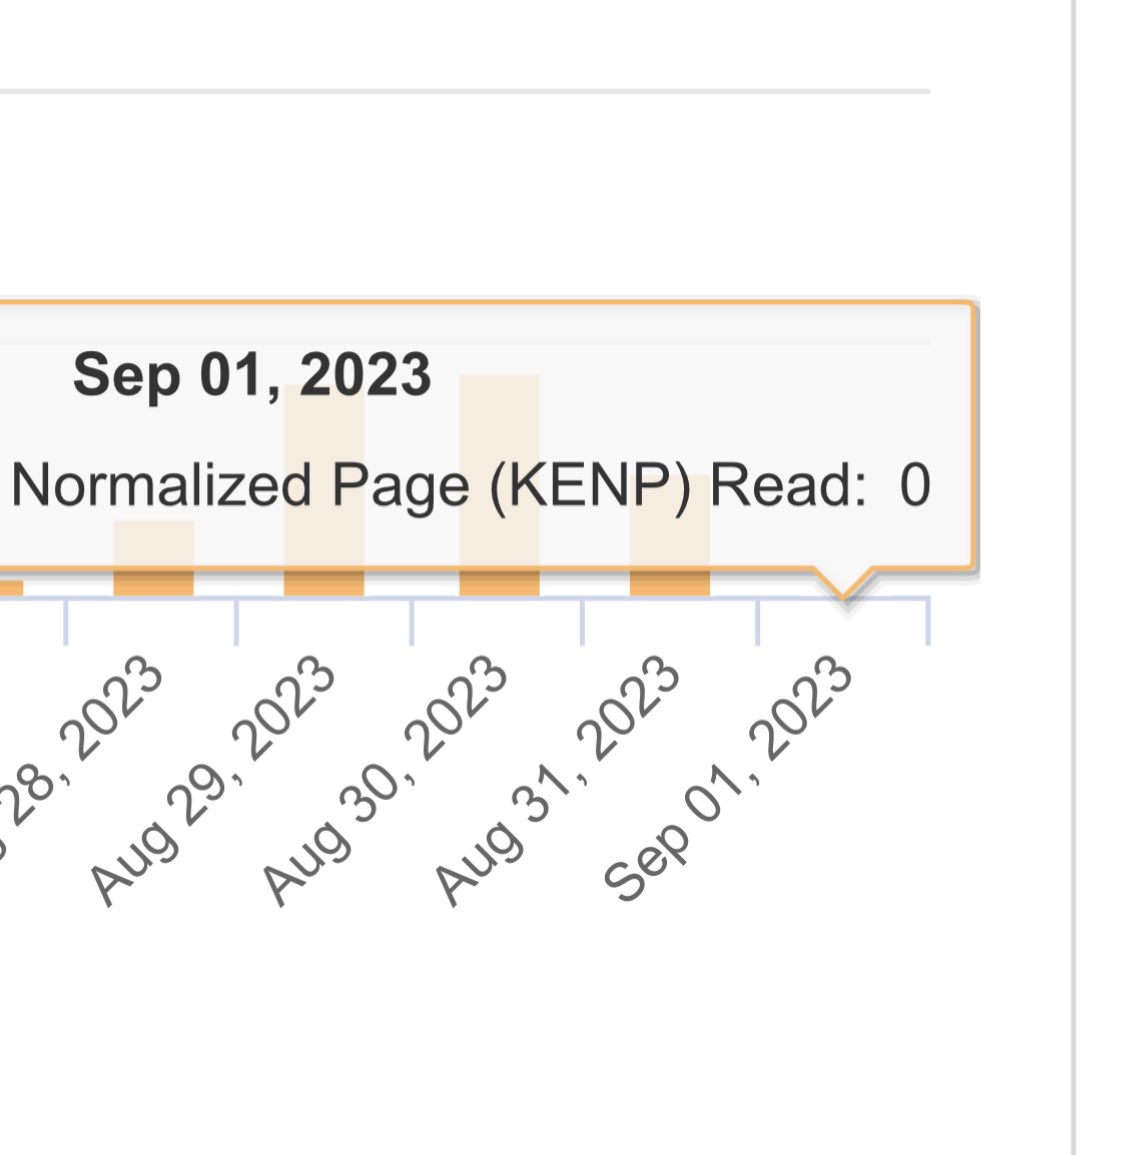 KDP sales reports. Did you know that a kindle sale shows on the old report within about 15 mins, but takes hours to show up on the new report. And page reads show up on the new & take hours to show on the old. So now you’ll be checking both every 5 minutes. You’re welcome. 😀